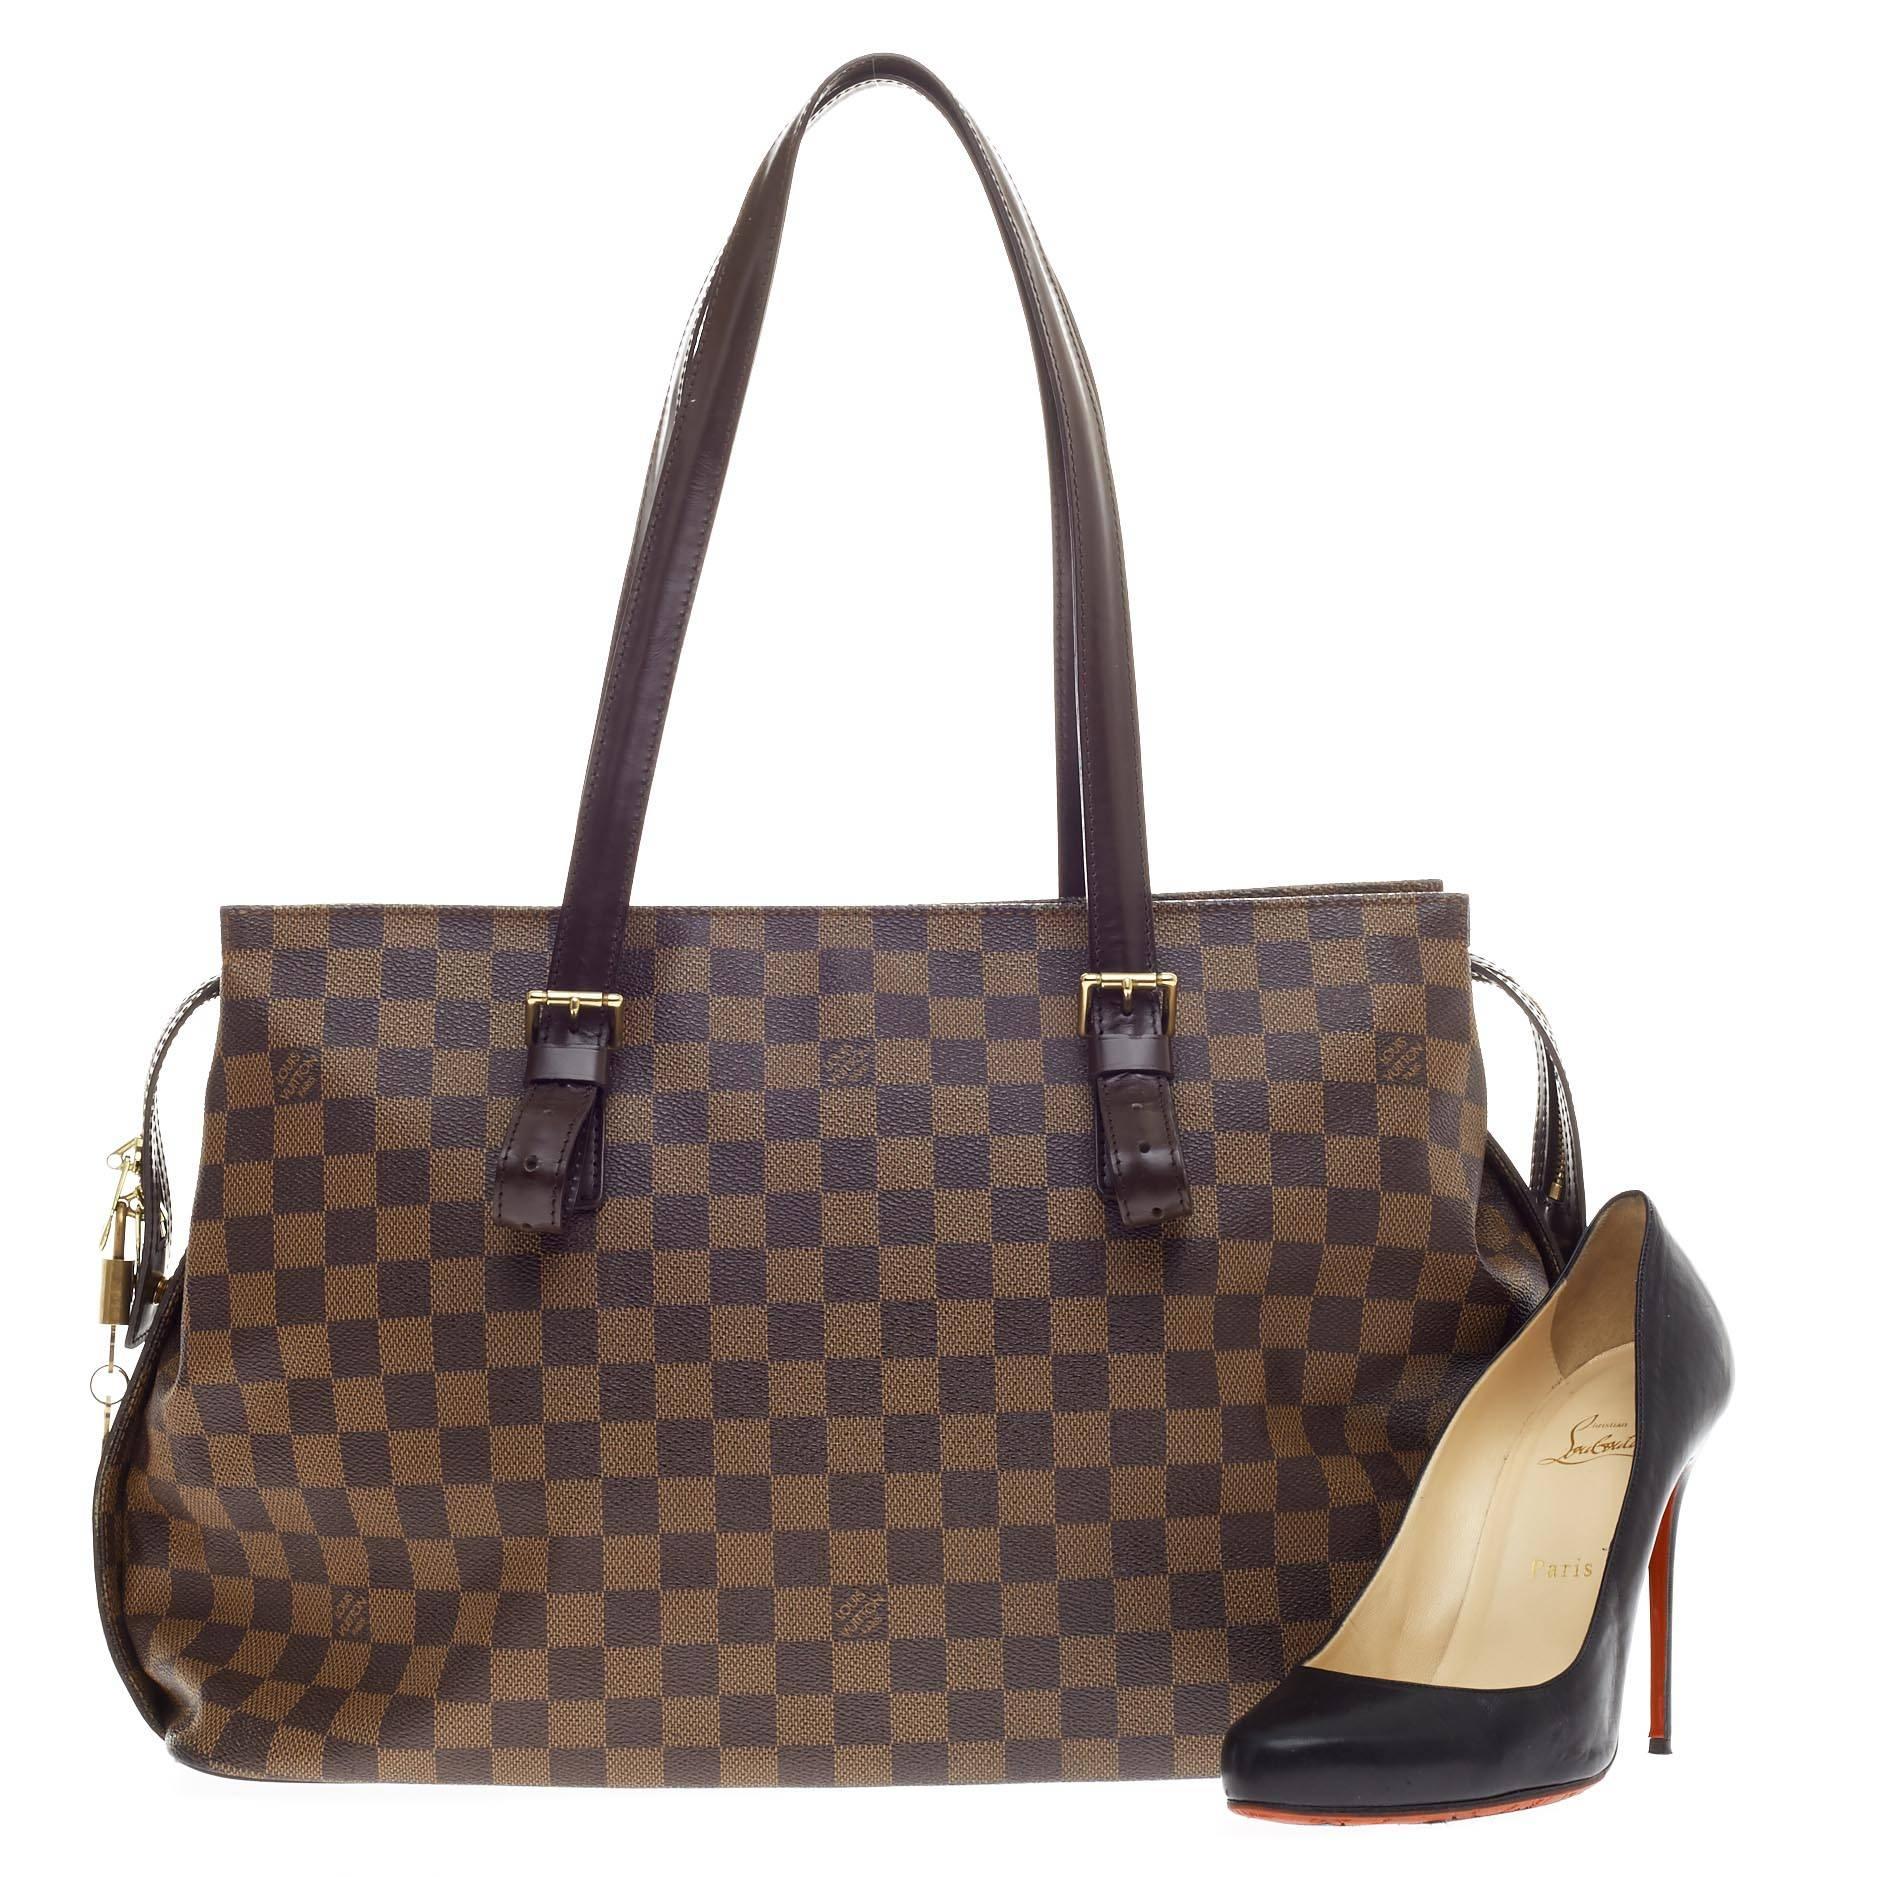 This authentic Louis Vuitton Chelsea Damier combines Louis Vuitton's classic style with sophisticated functionality. Constructed with the classic damier ebene monogram canvas and dark brown leather trims, this coated canvas tote features a simple